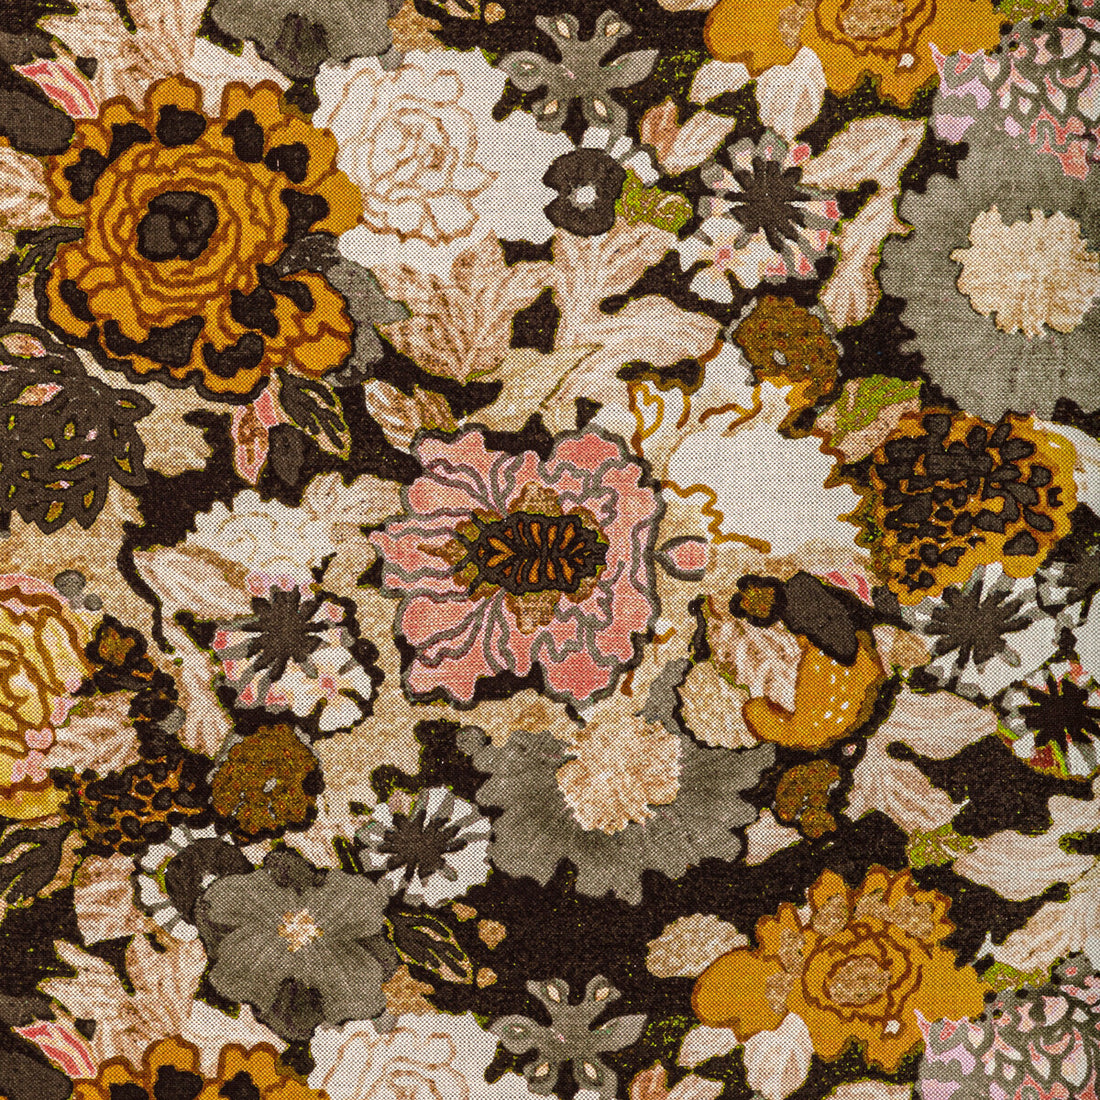 Arioso Print fabric in petal/coin color - pattern GWF-3774.417.0 - by Lee Jofa Modern in the Rhapsody collection